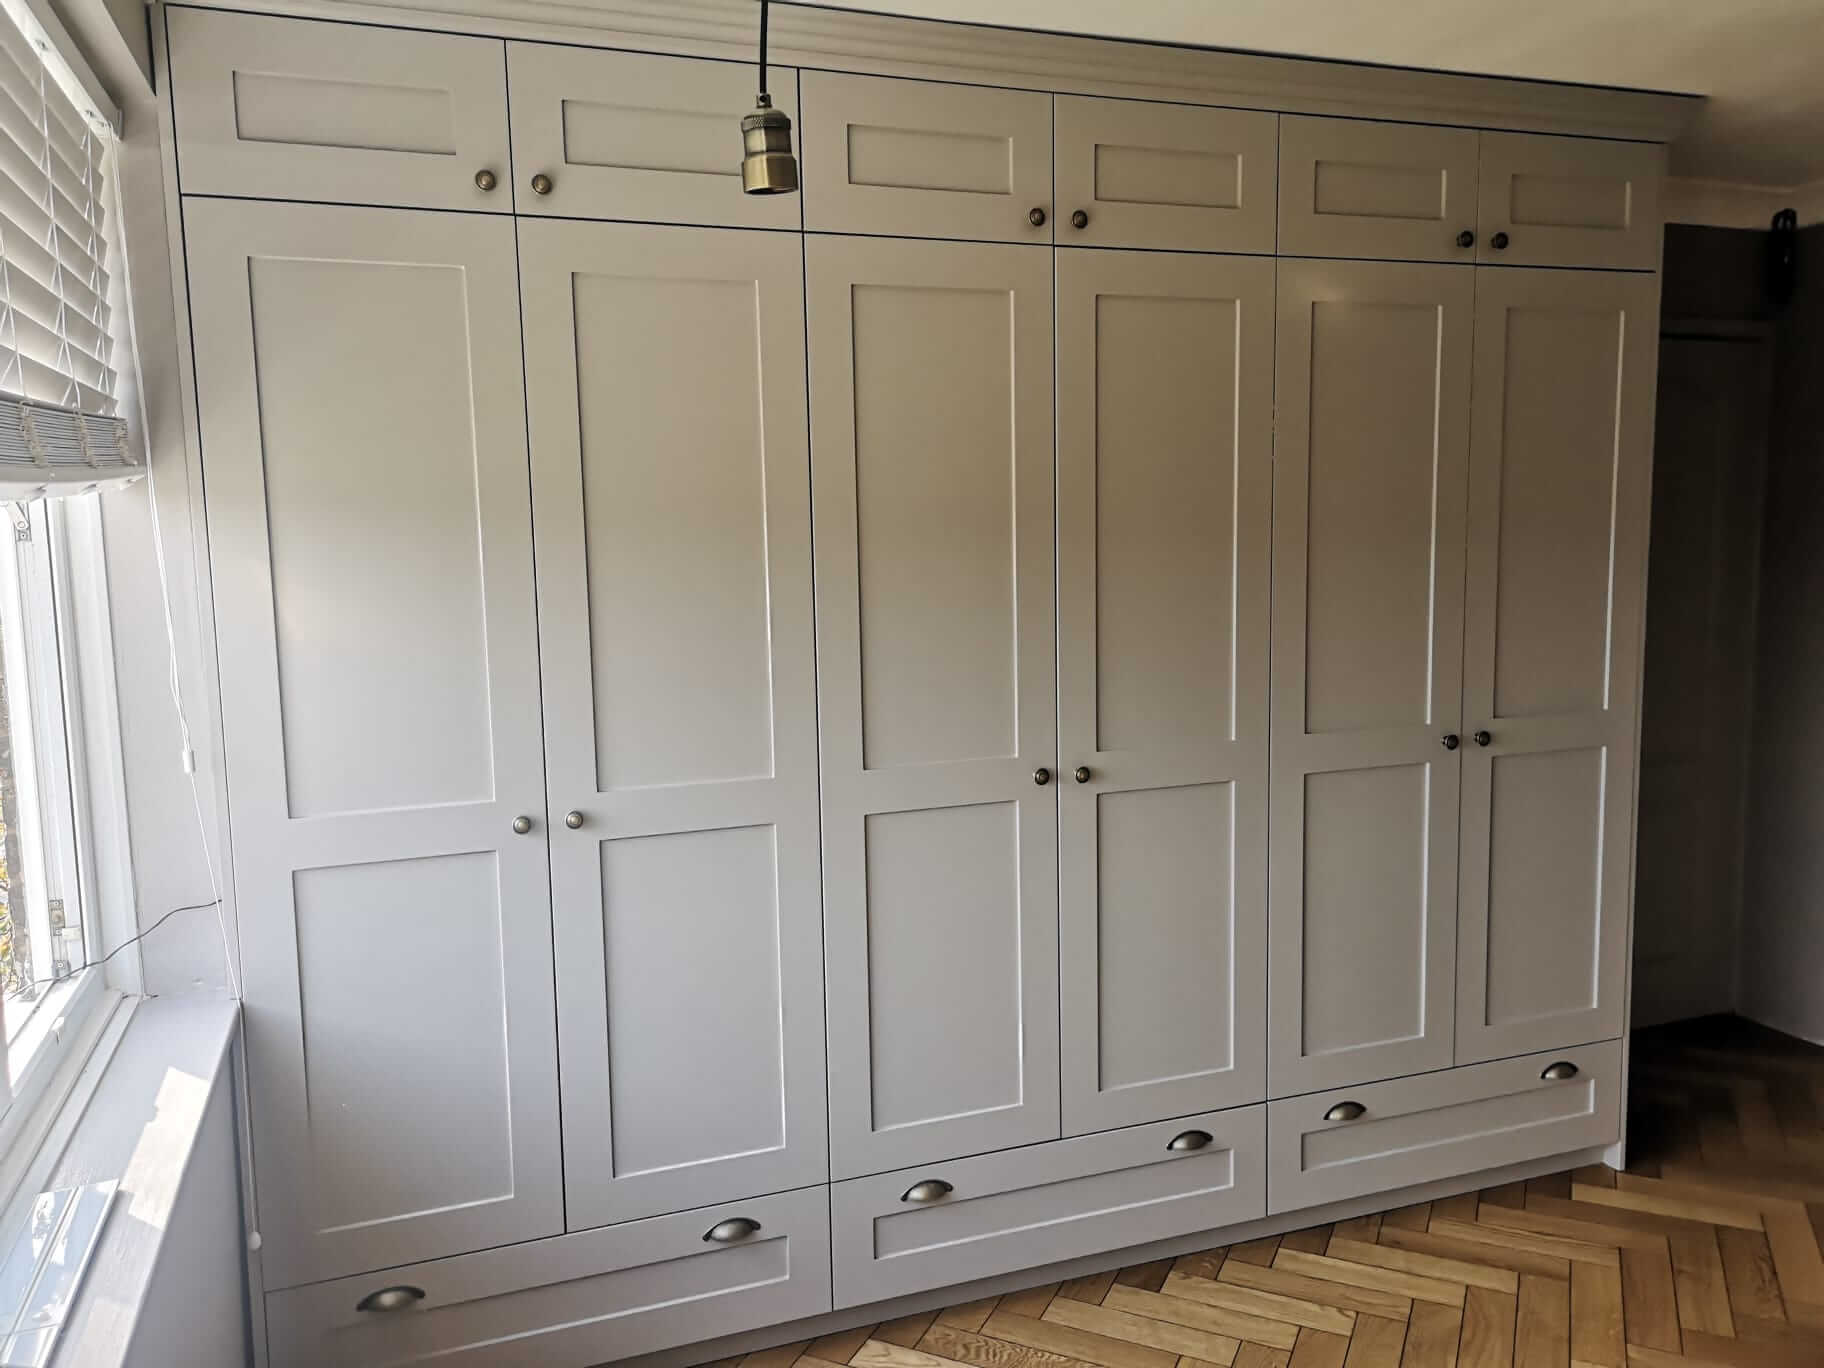 Fitted Wardrobes in Shaker style with storage above and below